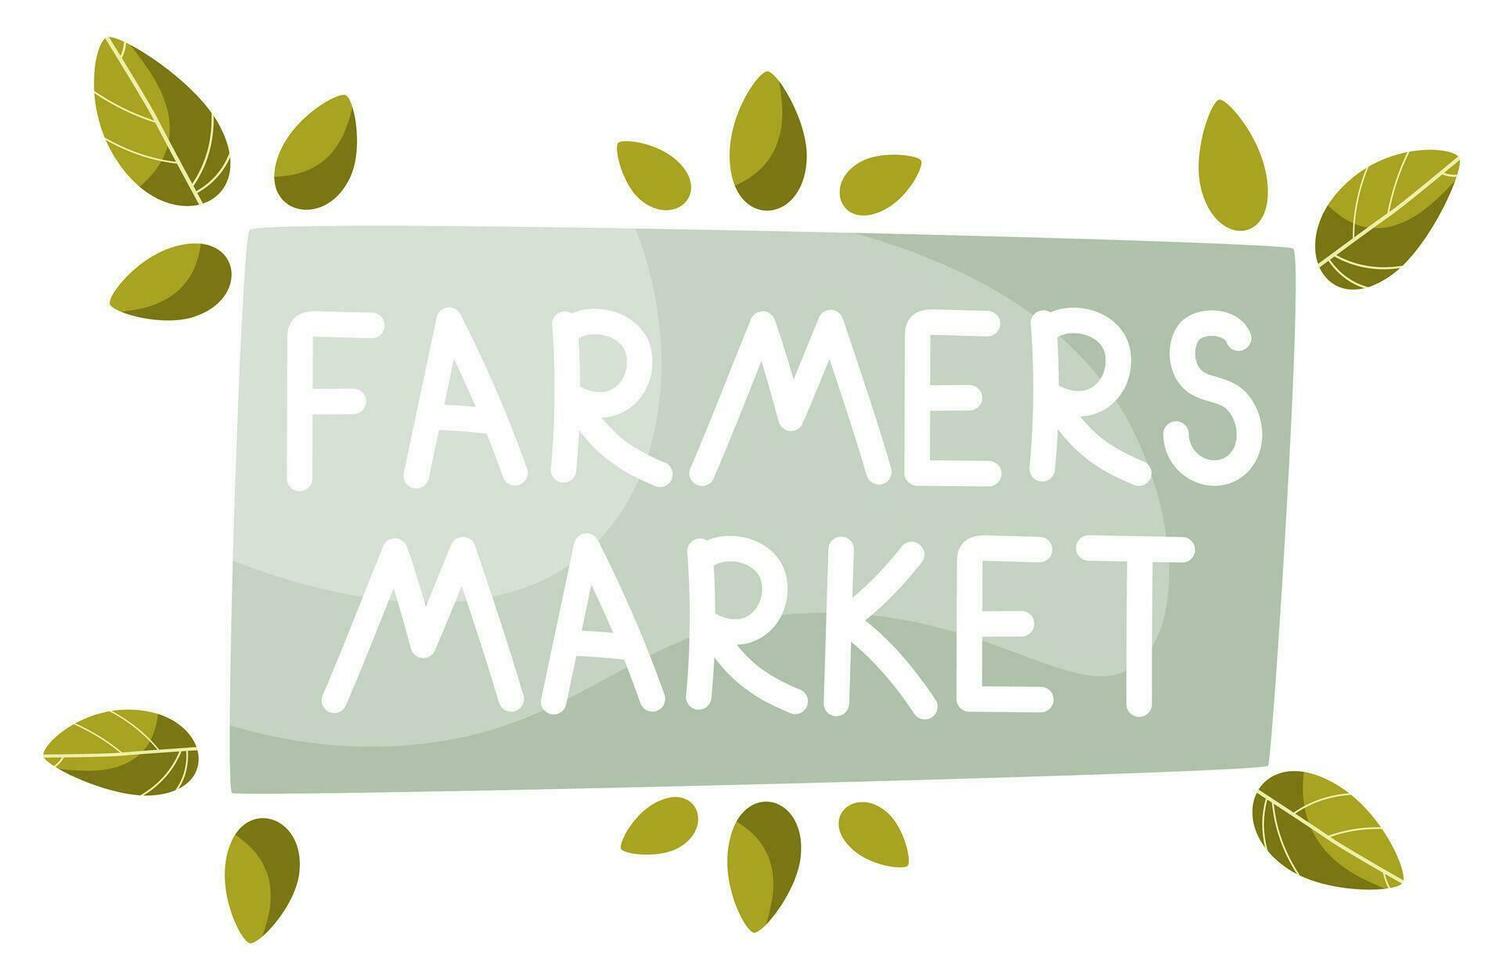 Farmer's market labels. Suitable for advertising, signage, packaging, corporate identity and web design. Farm fresh. The inscription farmer's market on a blue background, decorated with leaves. vector